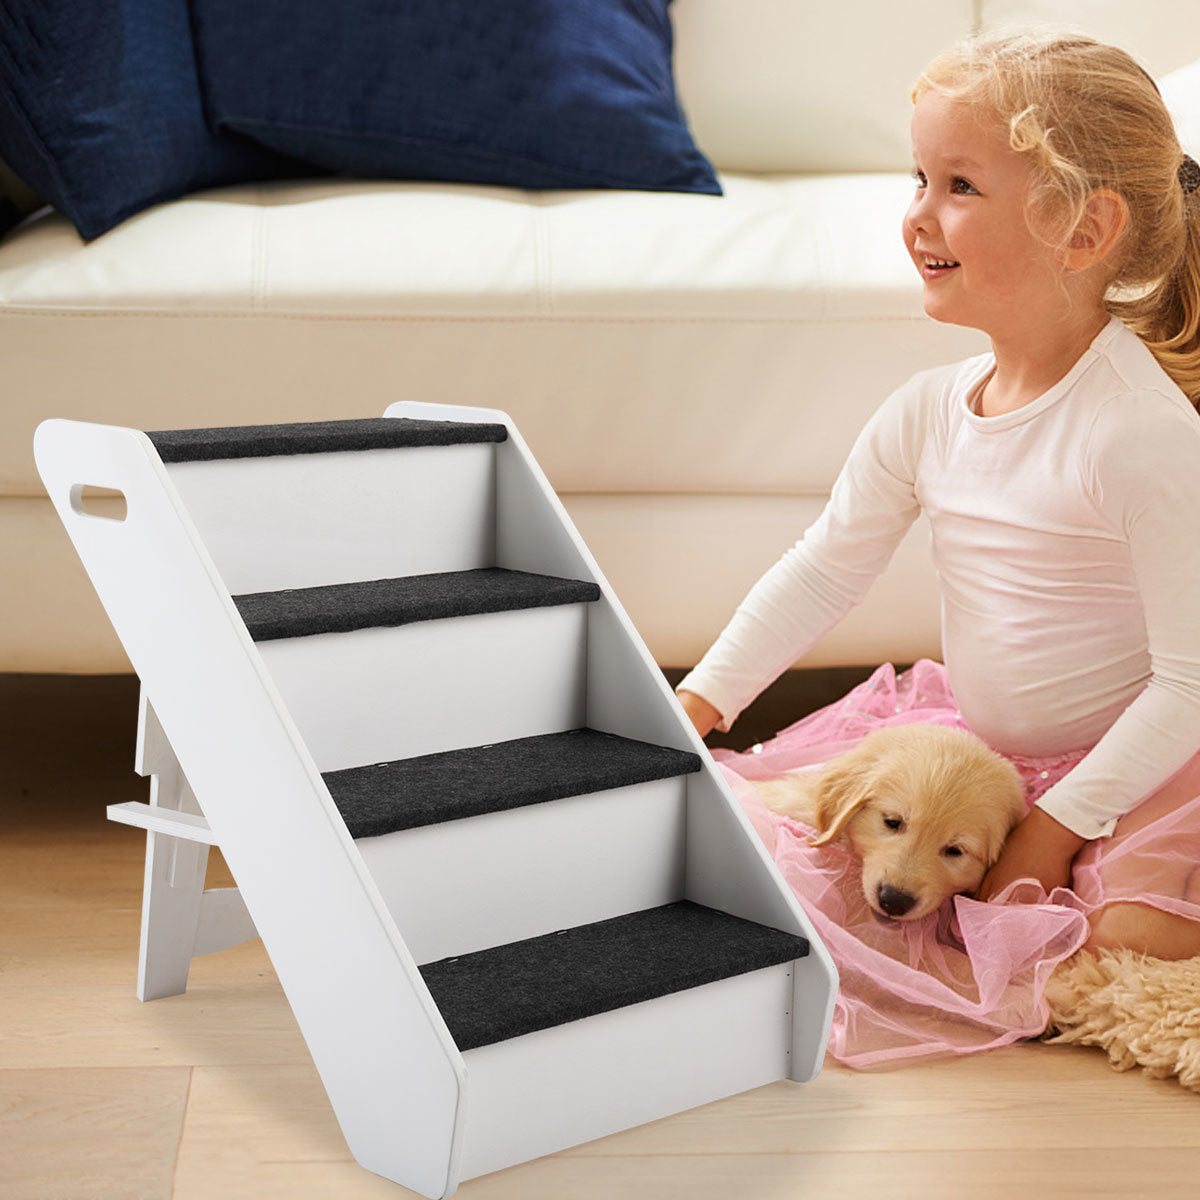 Four-Step wooden pet ladder, Jumping Support Safe Access to Sofa, for dogs and cats